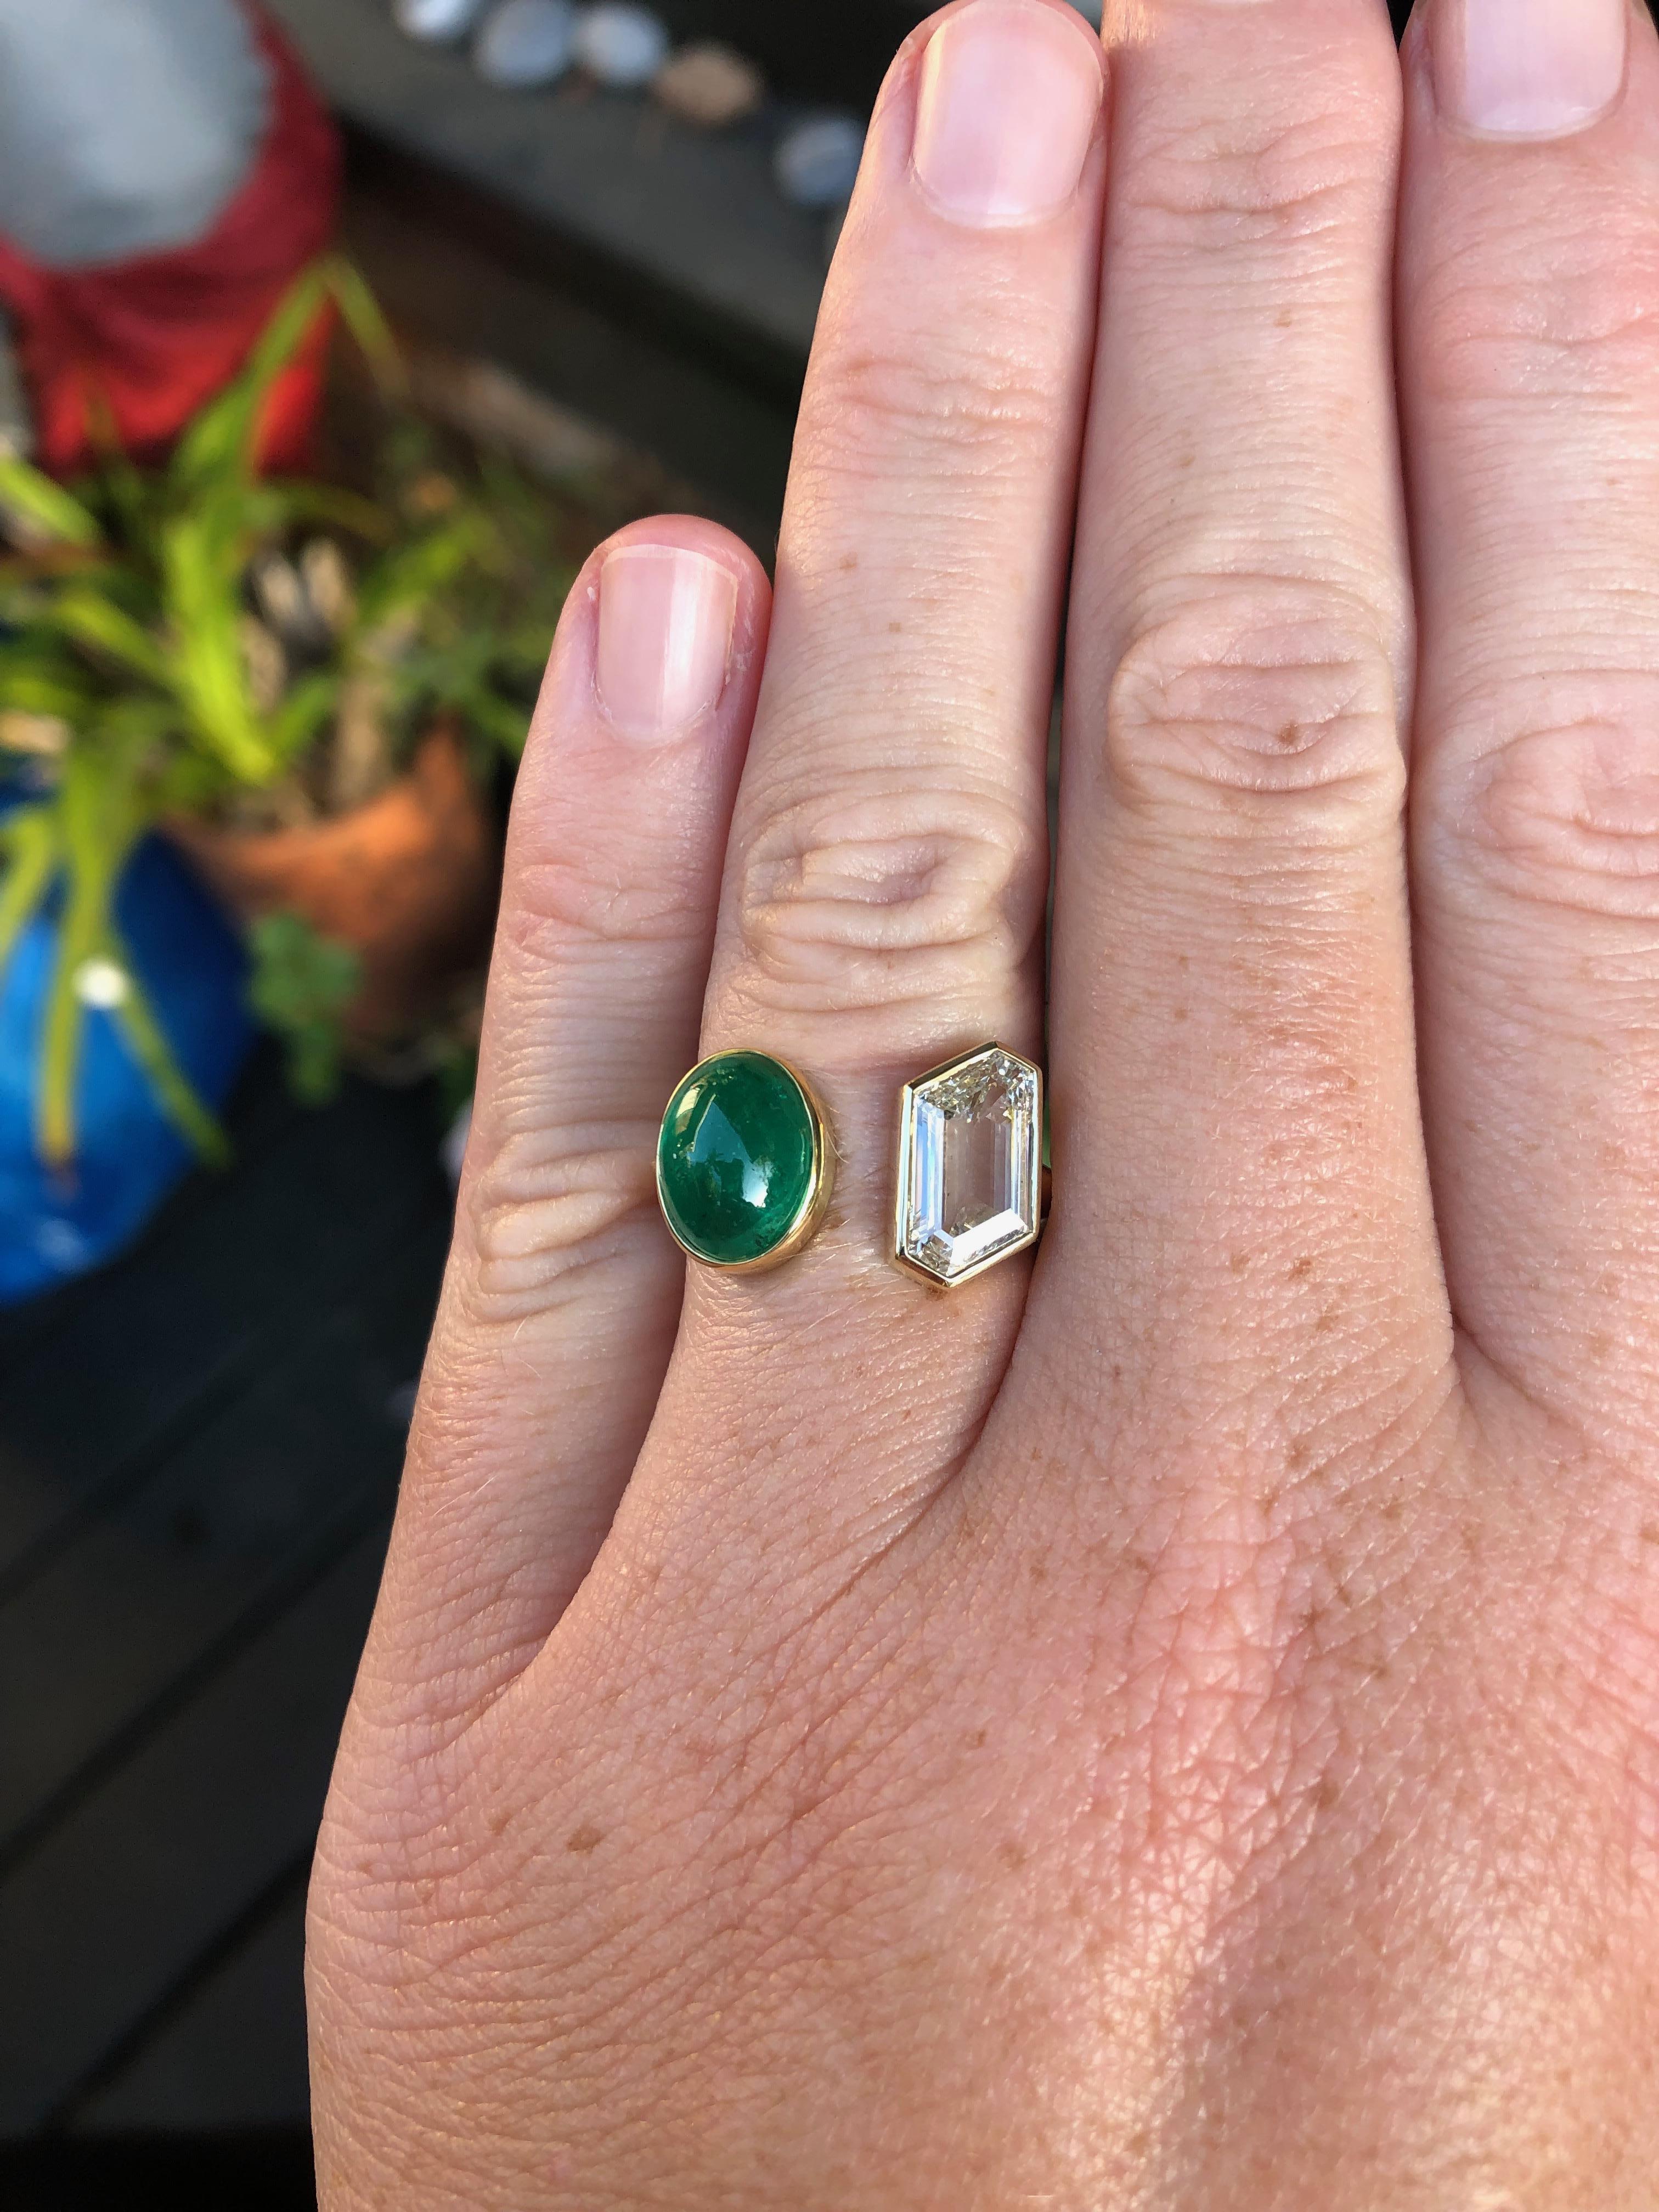 3.5 carat Colombian Muzo cabochon emerald and 1.86 carat GIA certified fancy shape diamond hand fabricated in 18 and 22 karat recycled gold. This emerald was sourced directly from Colombia through our collaboration with IEEX Emeralds. This one of a